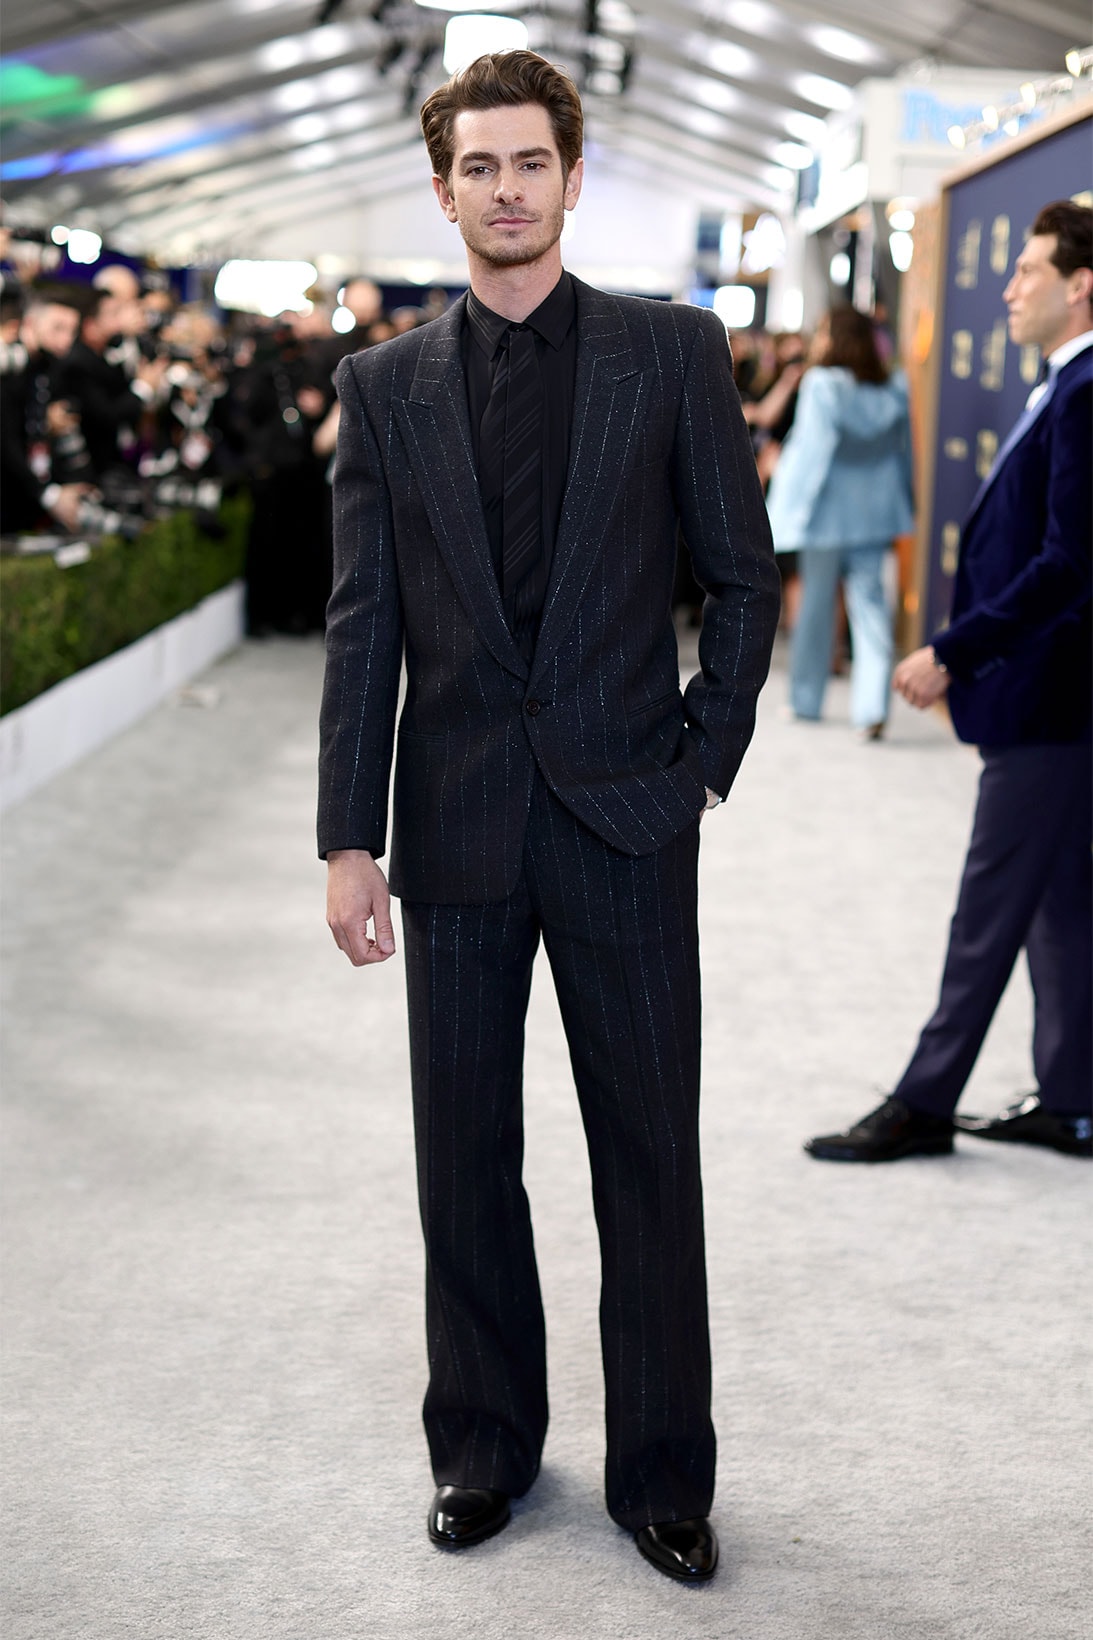 2022 28th SAG Awards Red Carpet Andrew Garfield